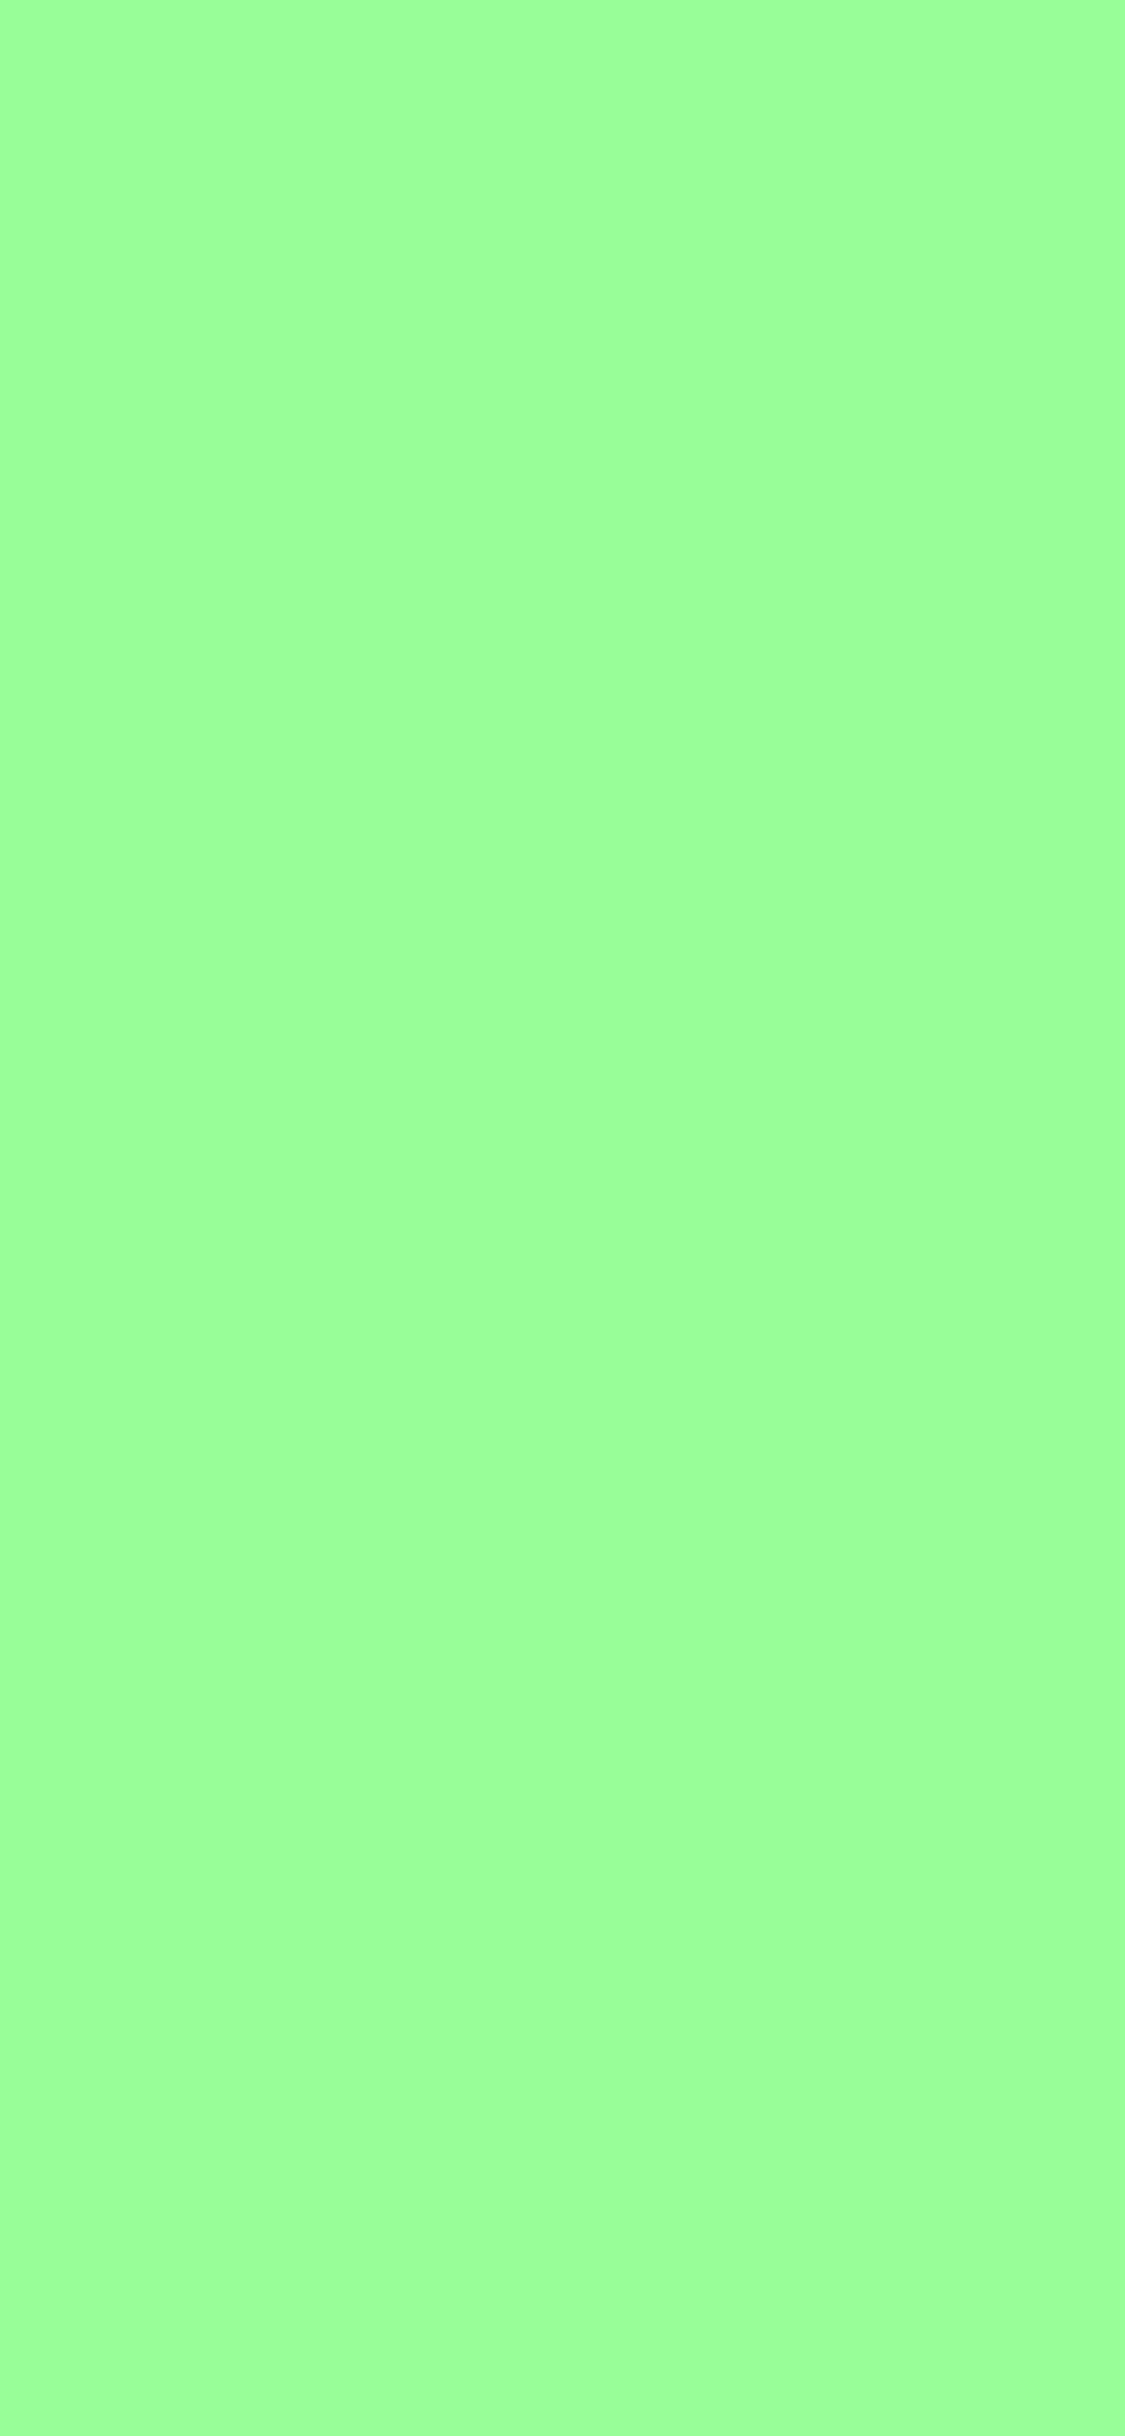 1125x2436 Mint Green Solid Color Background